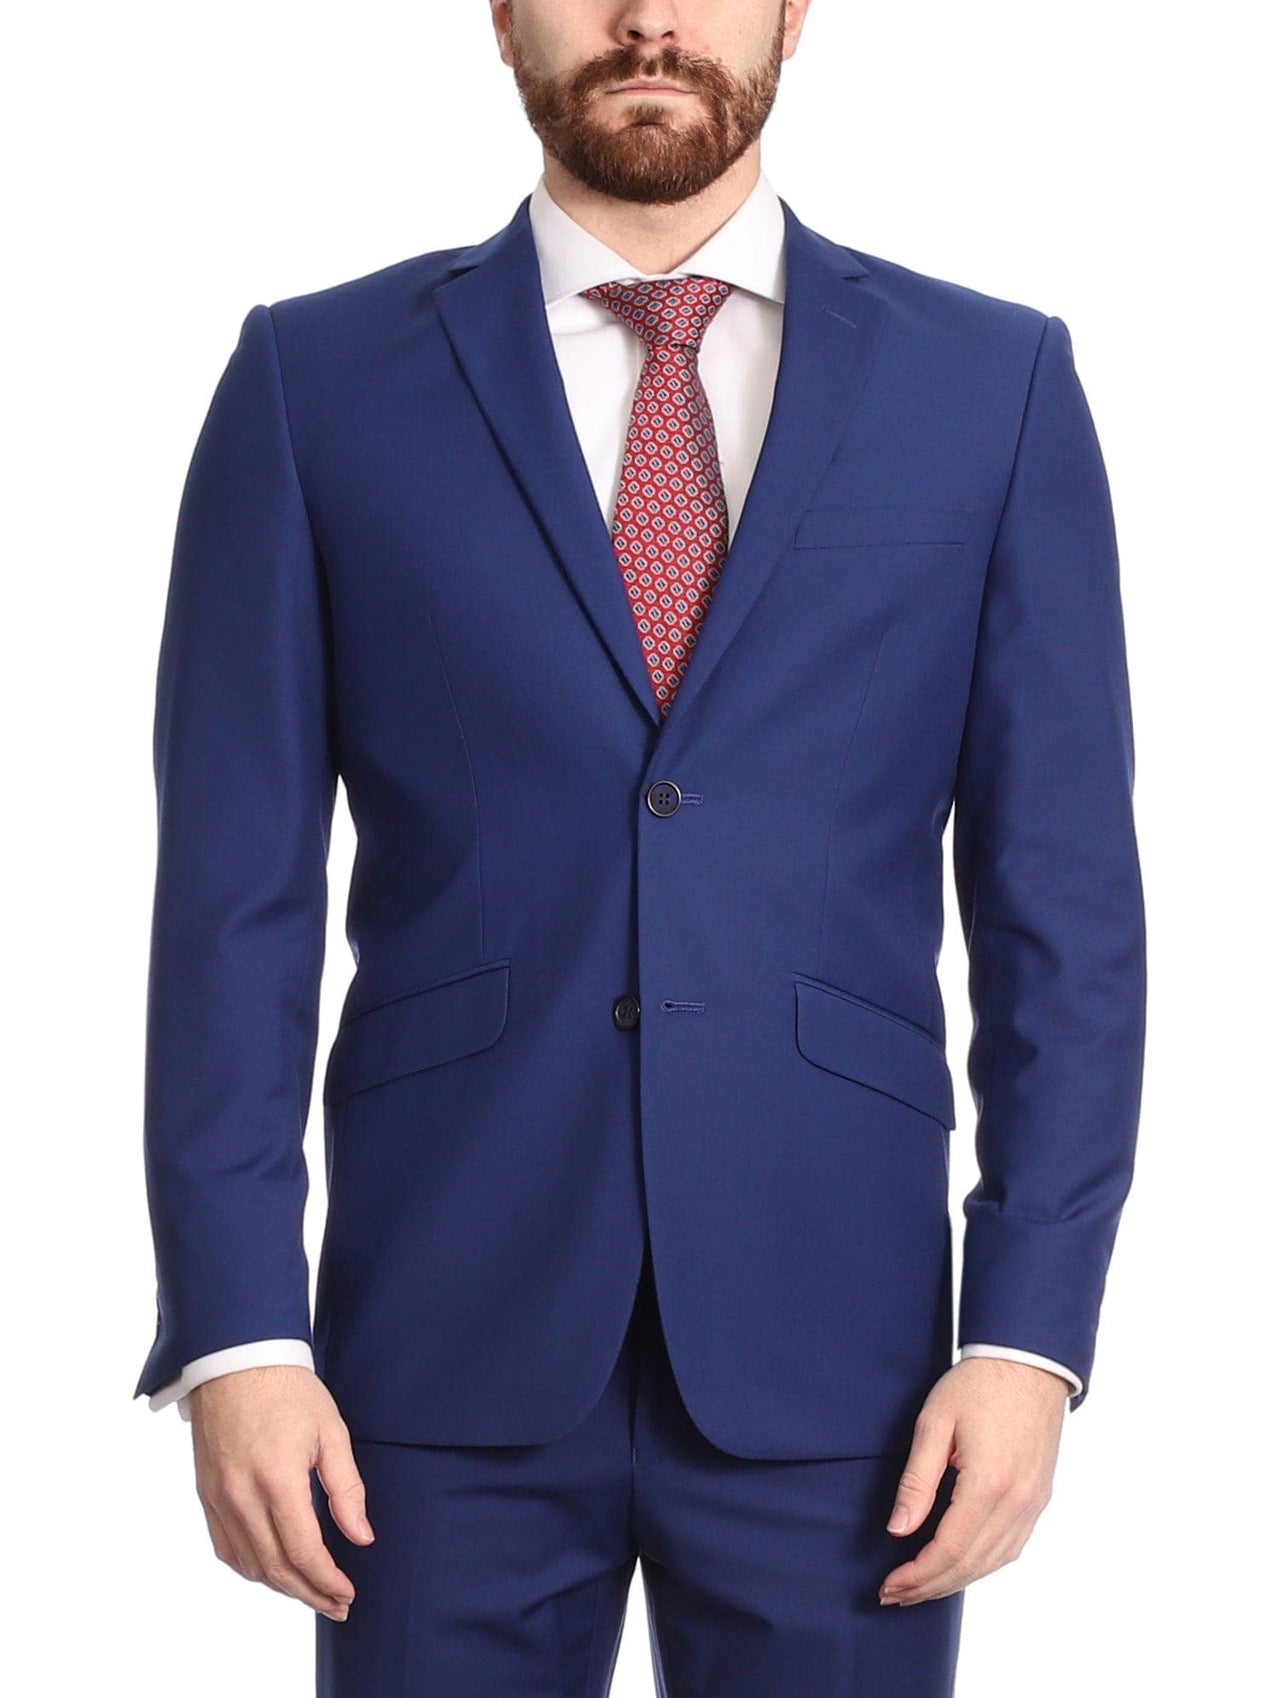 French blue two-button men's suit jacket